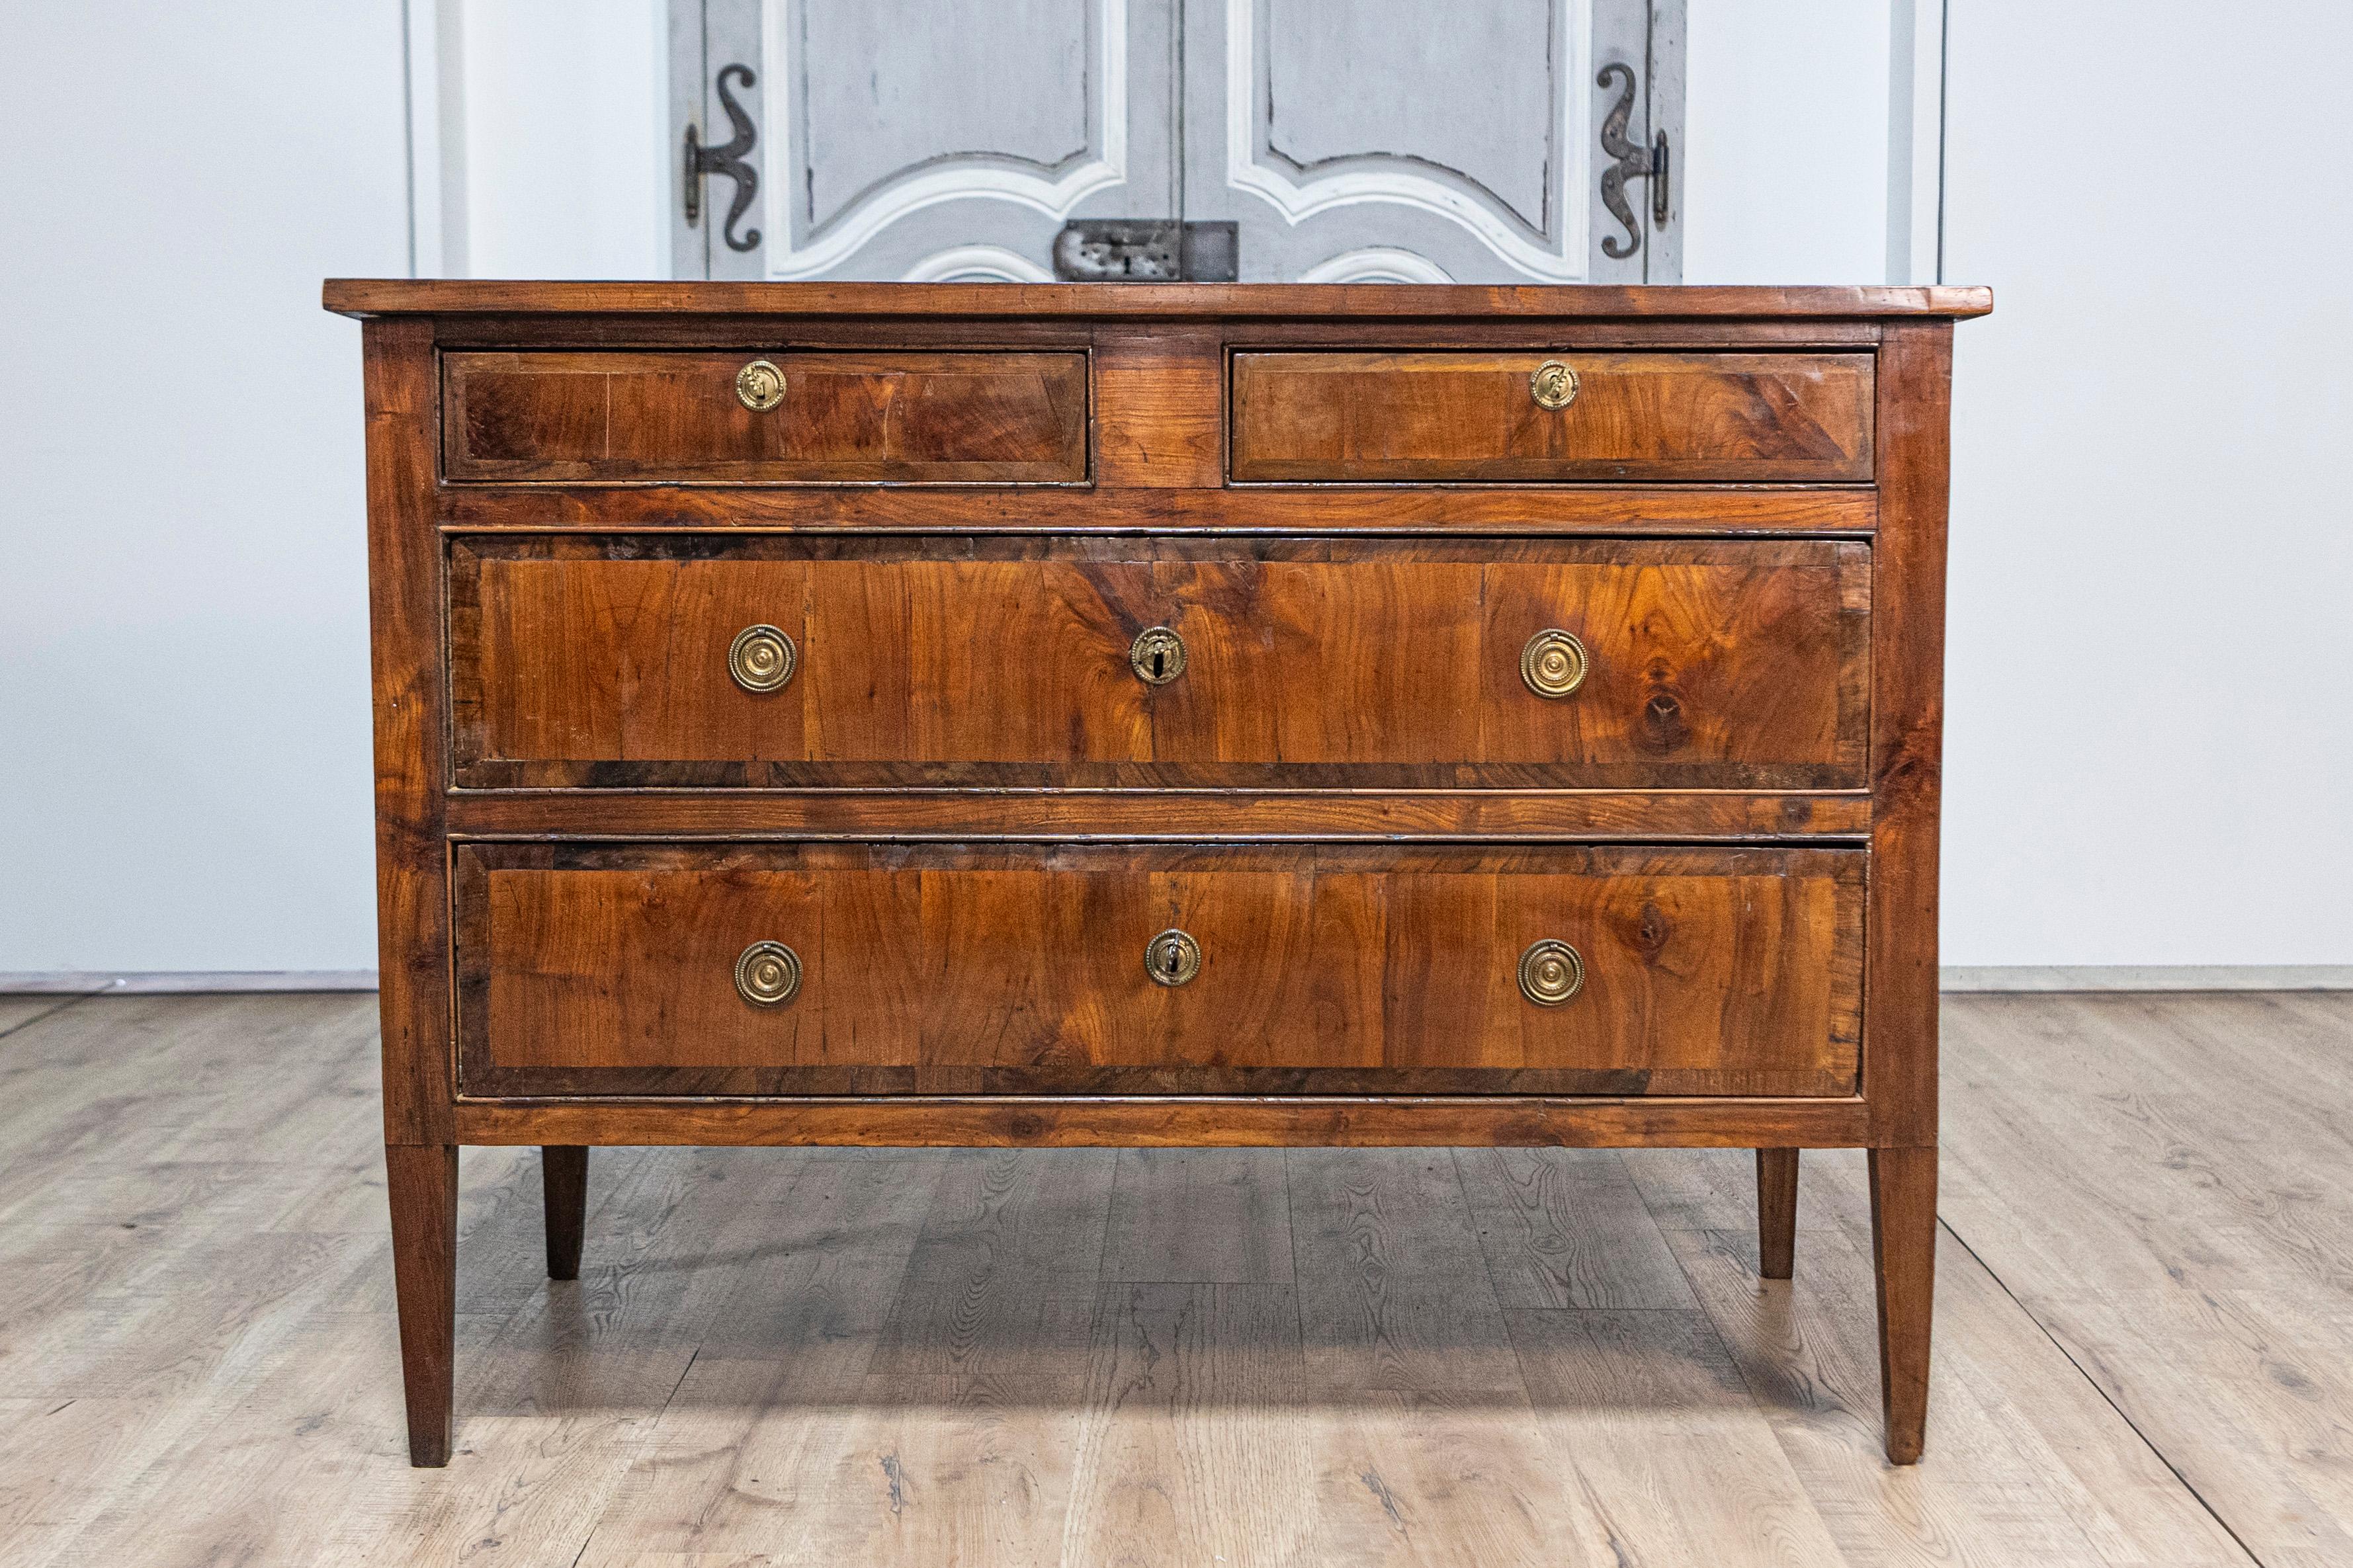 Italian Neoclassical Period 18th Century Walnut Commode with Four Drawers For Sale 8